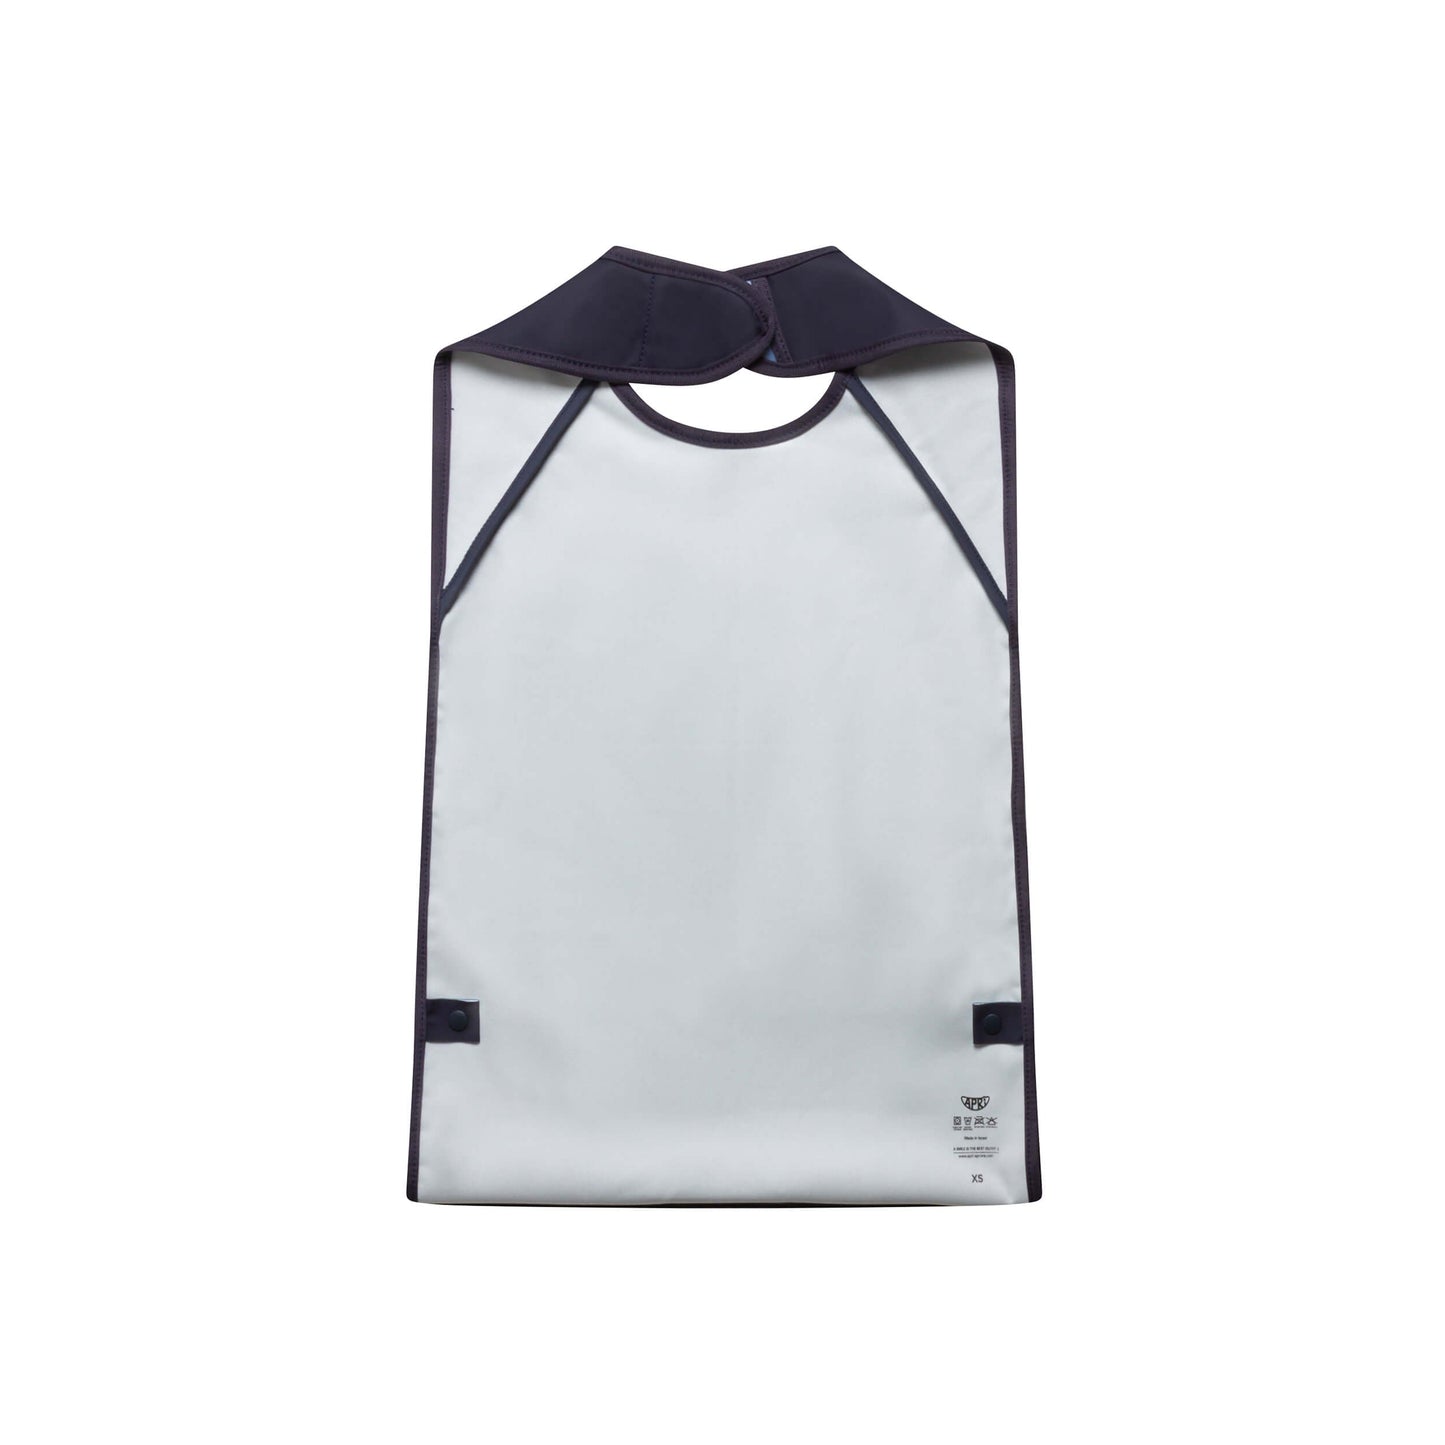 Waterproof Apri bib for Adults, teens and kids with disabilities. Classic dark blue, sleeveless with washable silicone fastener. 